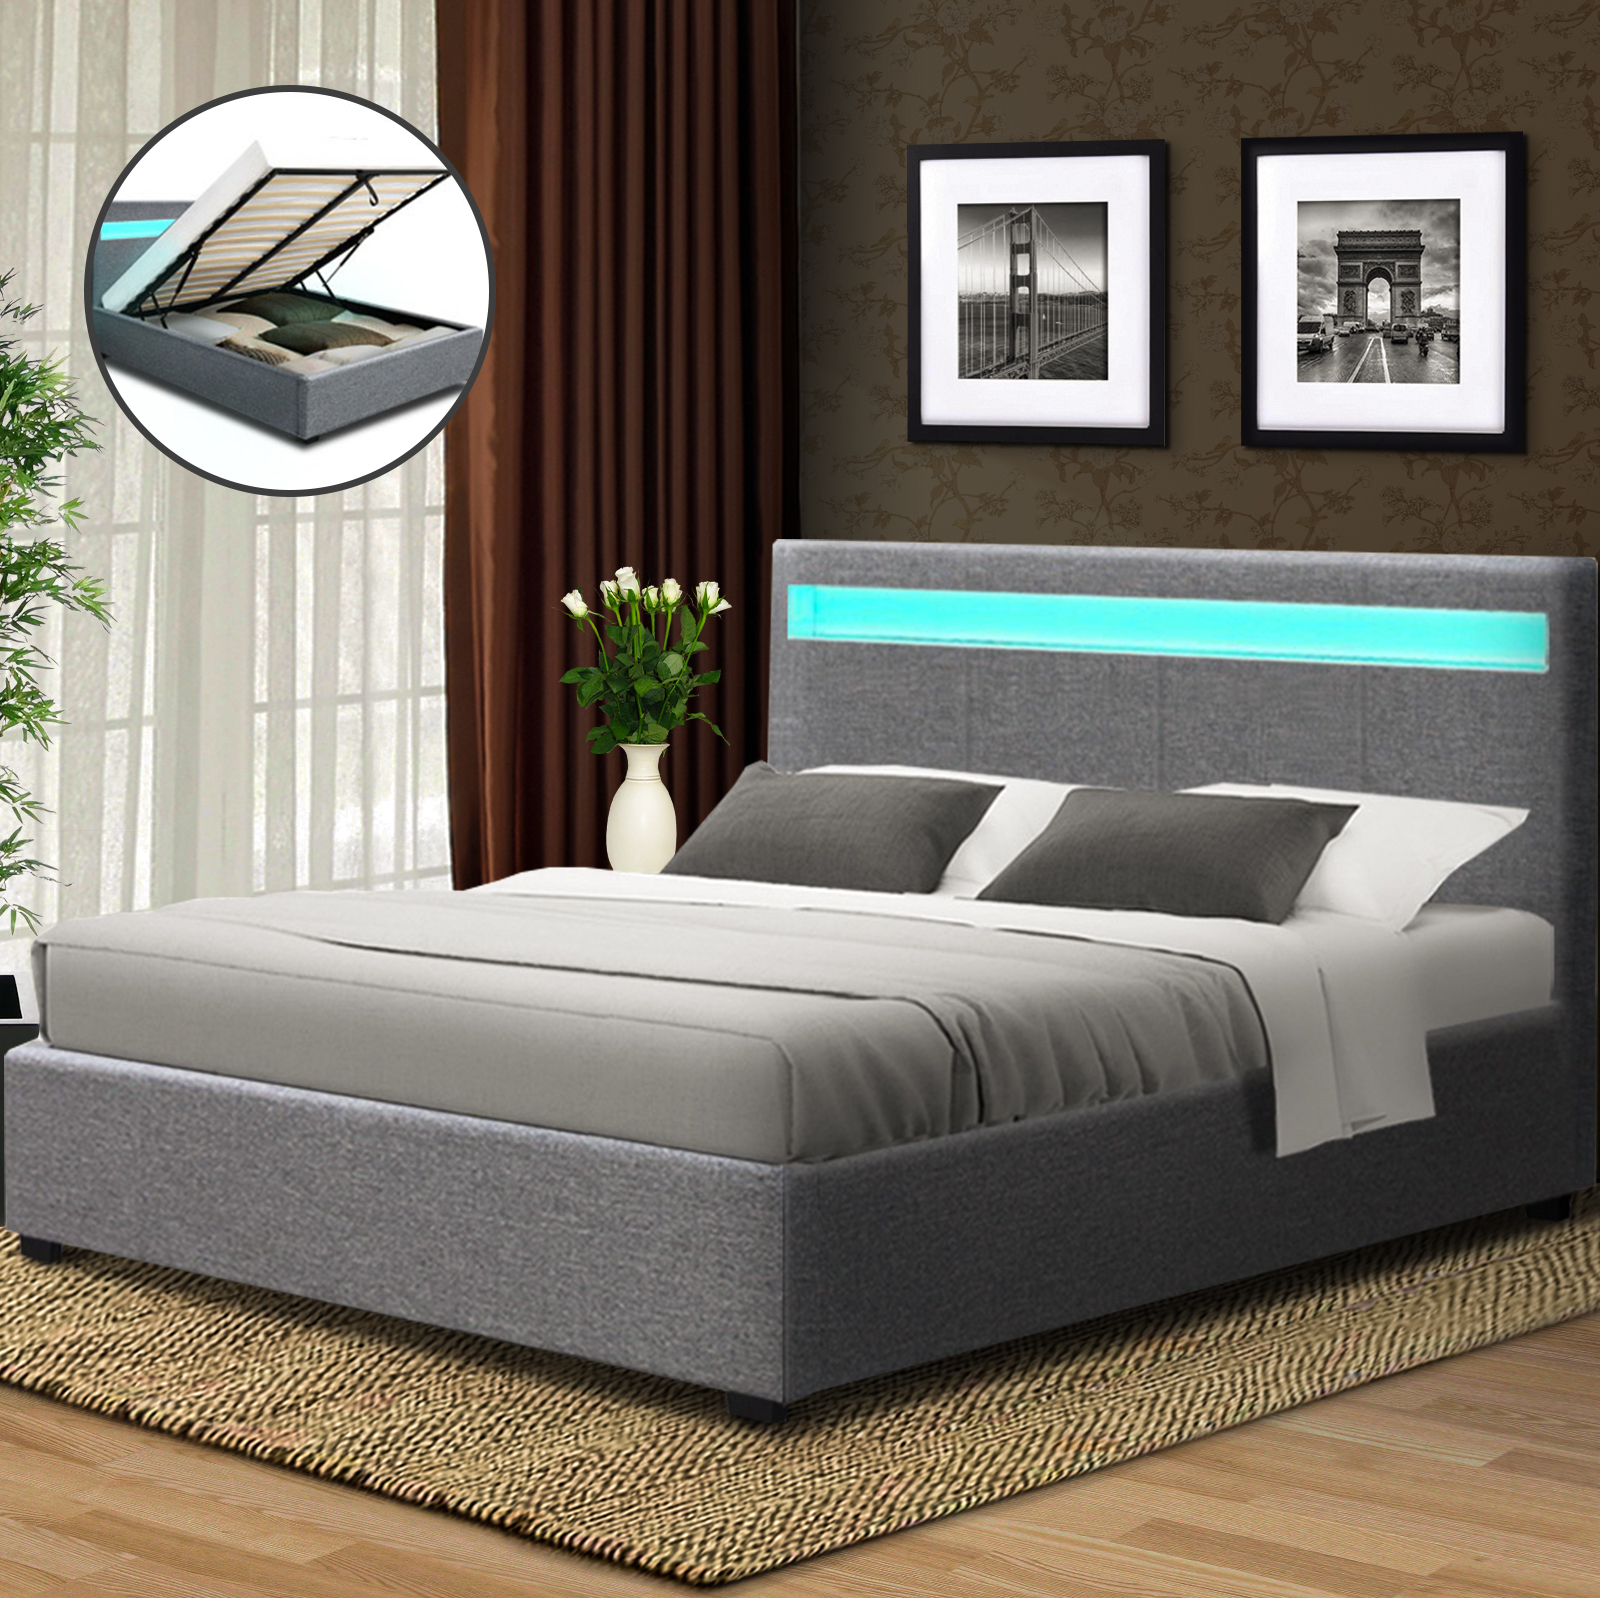 Artiss Bed Frame Double Size LED Gas Lift Grey COLE